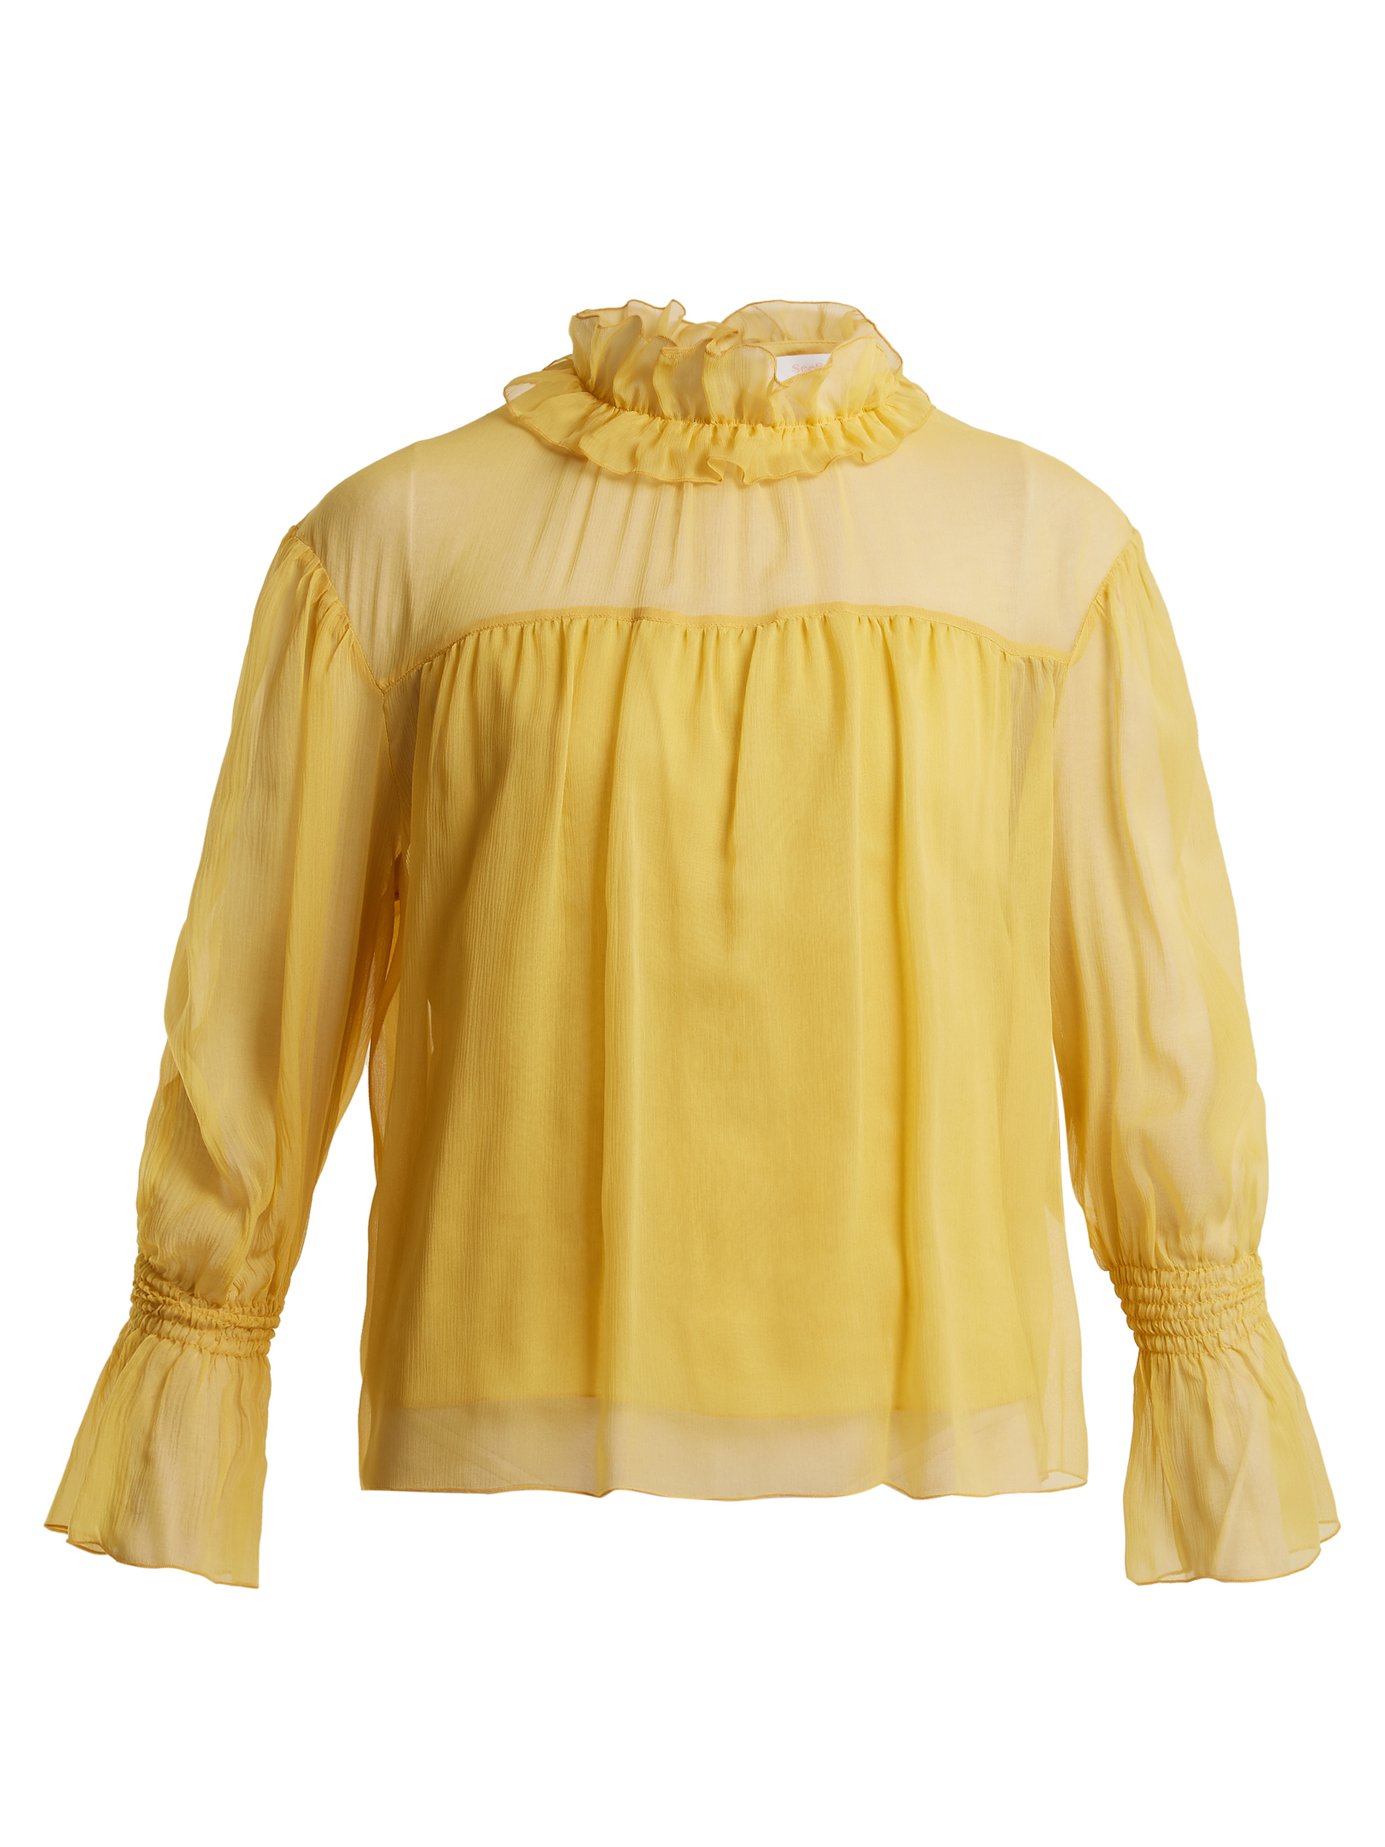 See By Chloé - Ruffled-Neck Silk Blouse - Yellow | FASHION STYLE FAN